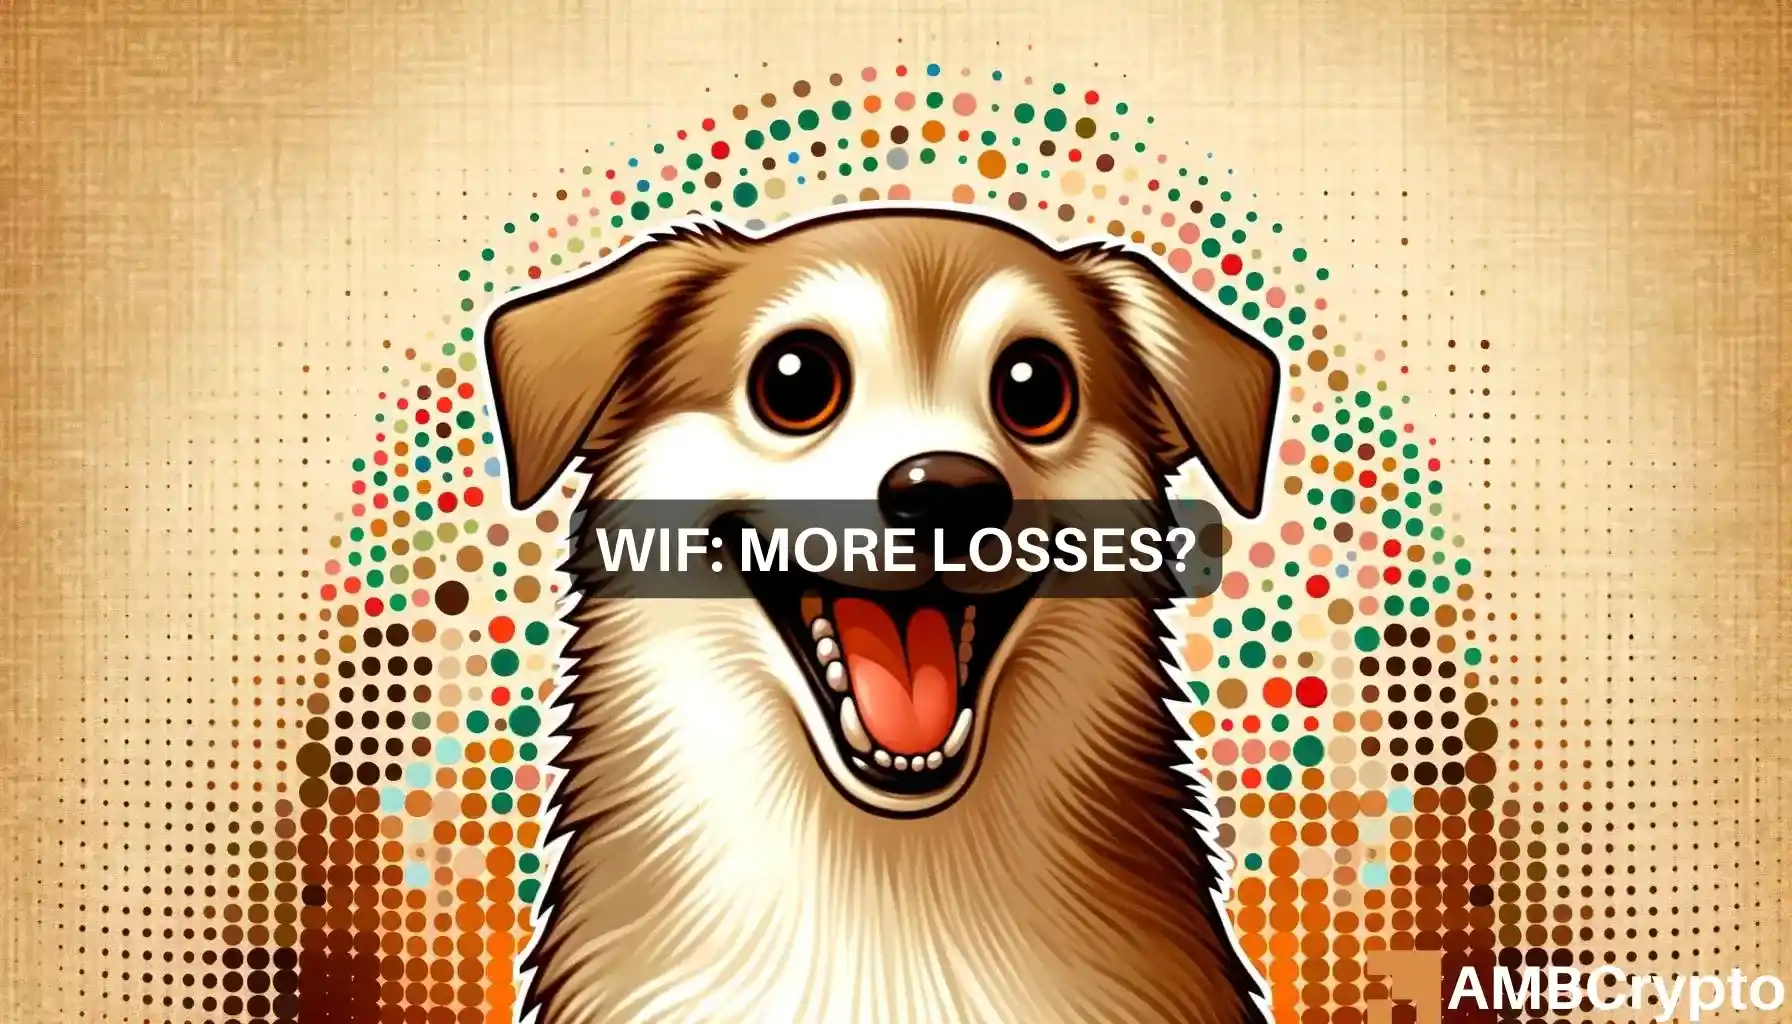 dogwifhat unable to cross $3.6: Will WIF’s price crash to $2.4?